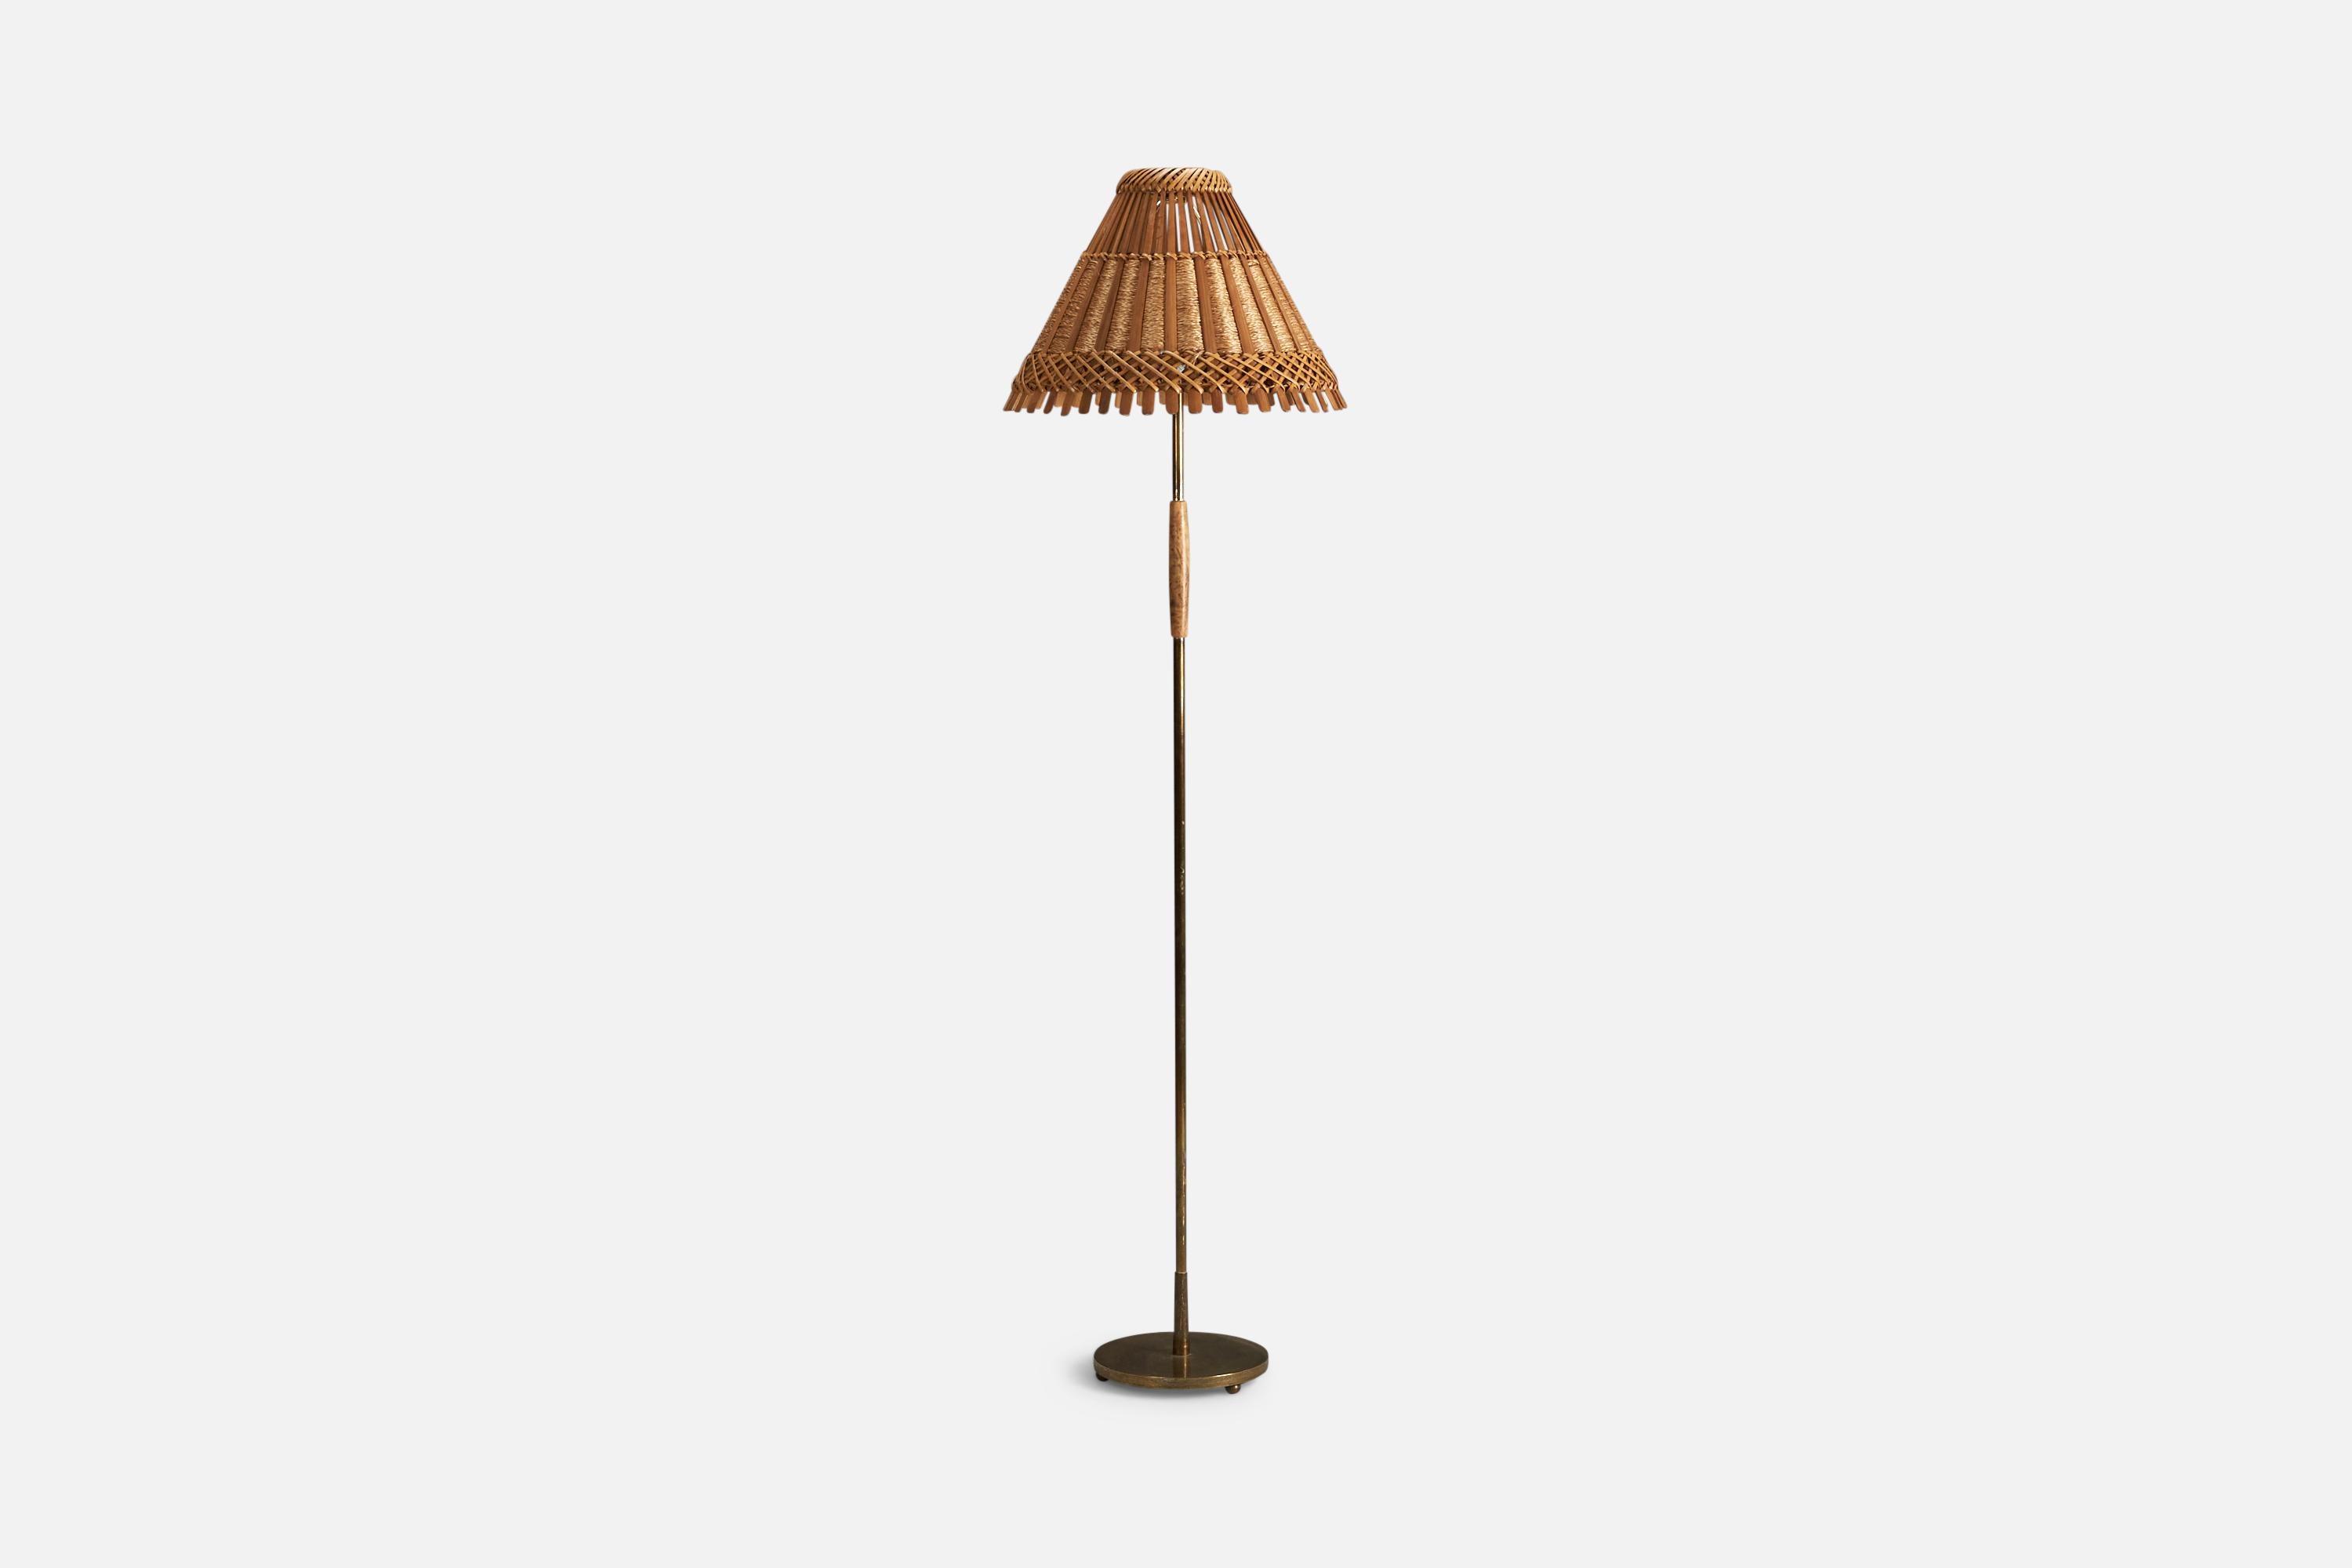 A brass, birch, rattan and raffia floor lamp designed and produced by a Swedish Designer, Sweden, 1950s.

Socket takes standard E-26 medium base bulb.

There is no maximum wattage stated on the fixture.